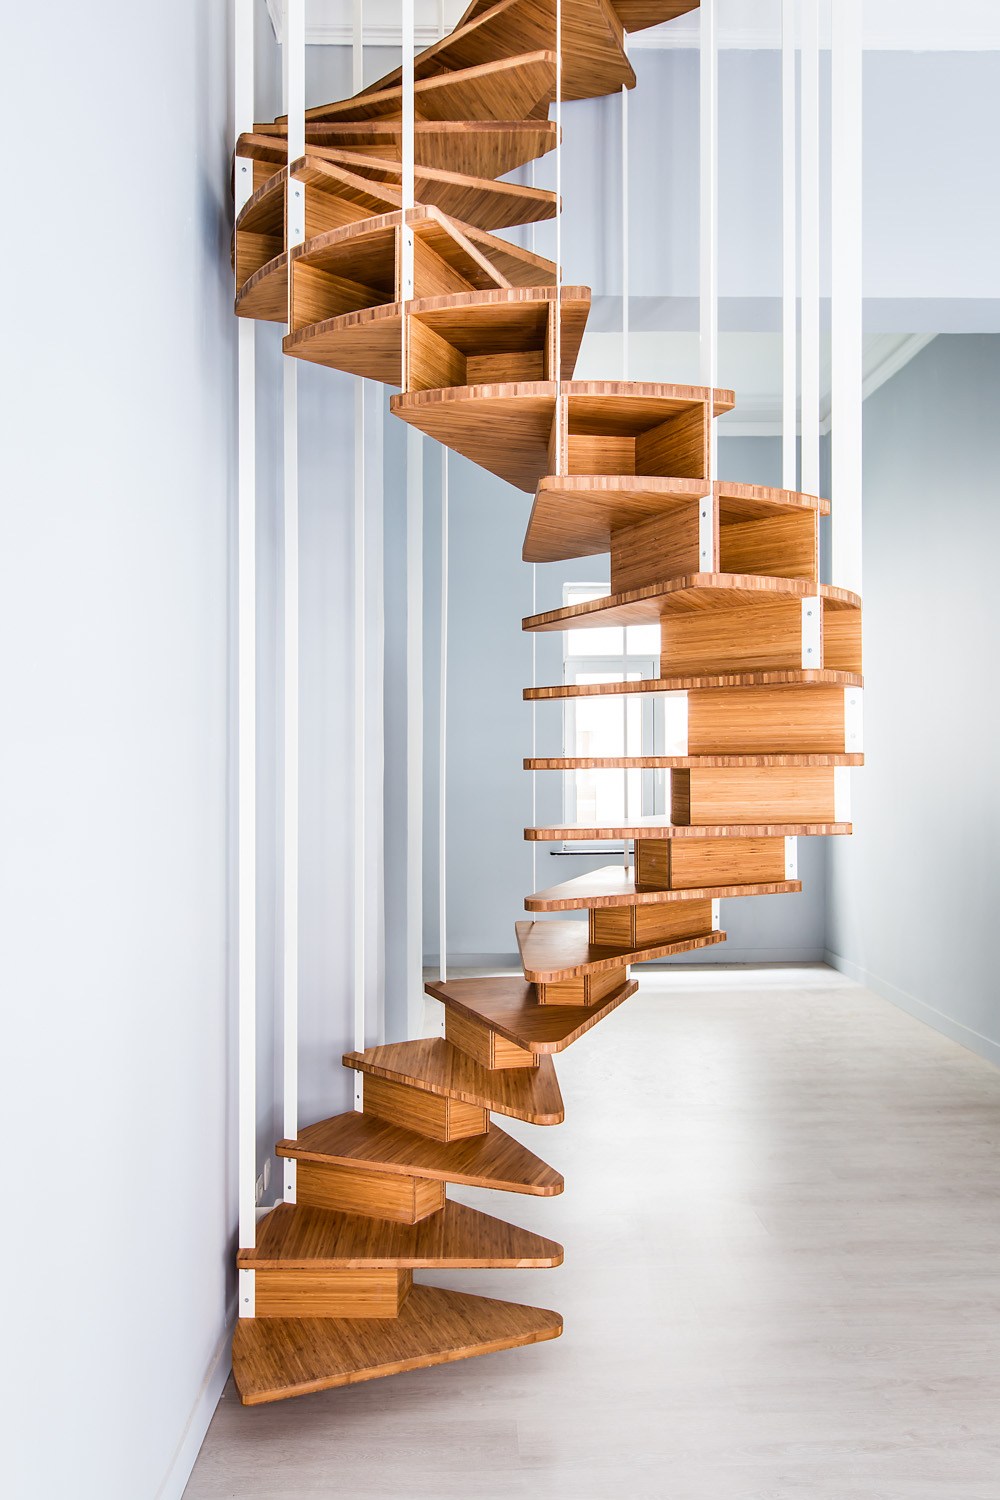 How to build a wooden spiral staircase - My Staircase Gallery